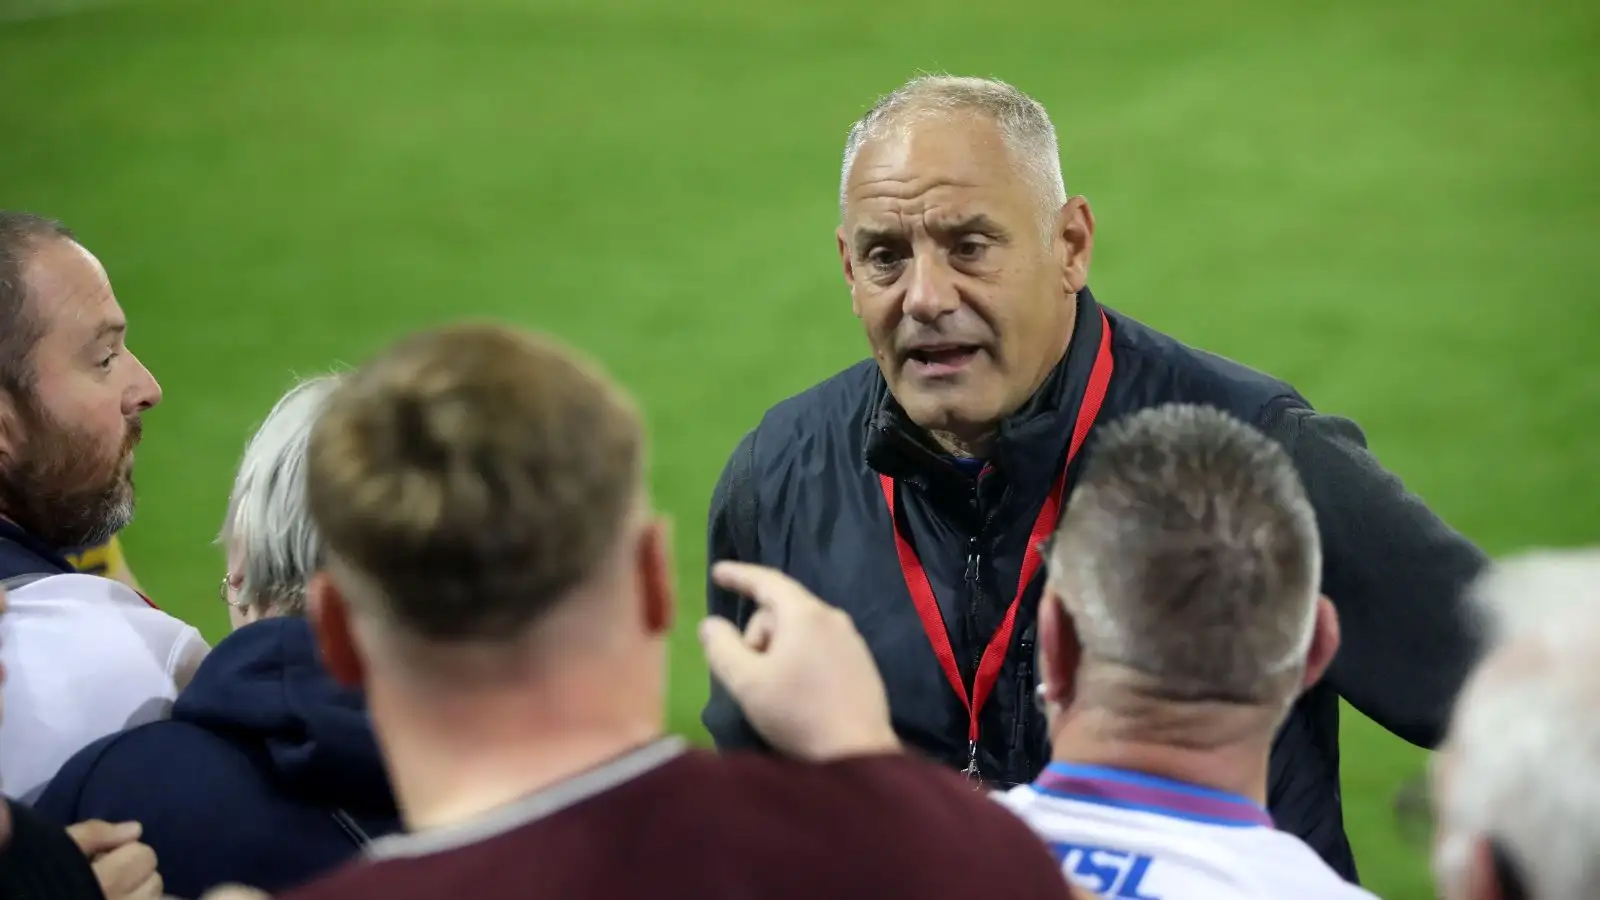 Wakefield Trinity CEO Michael Carter is confronted by fans following their relegation